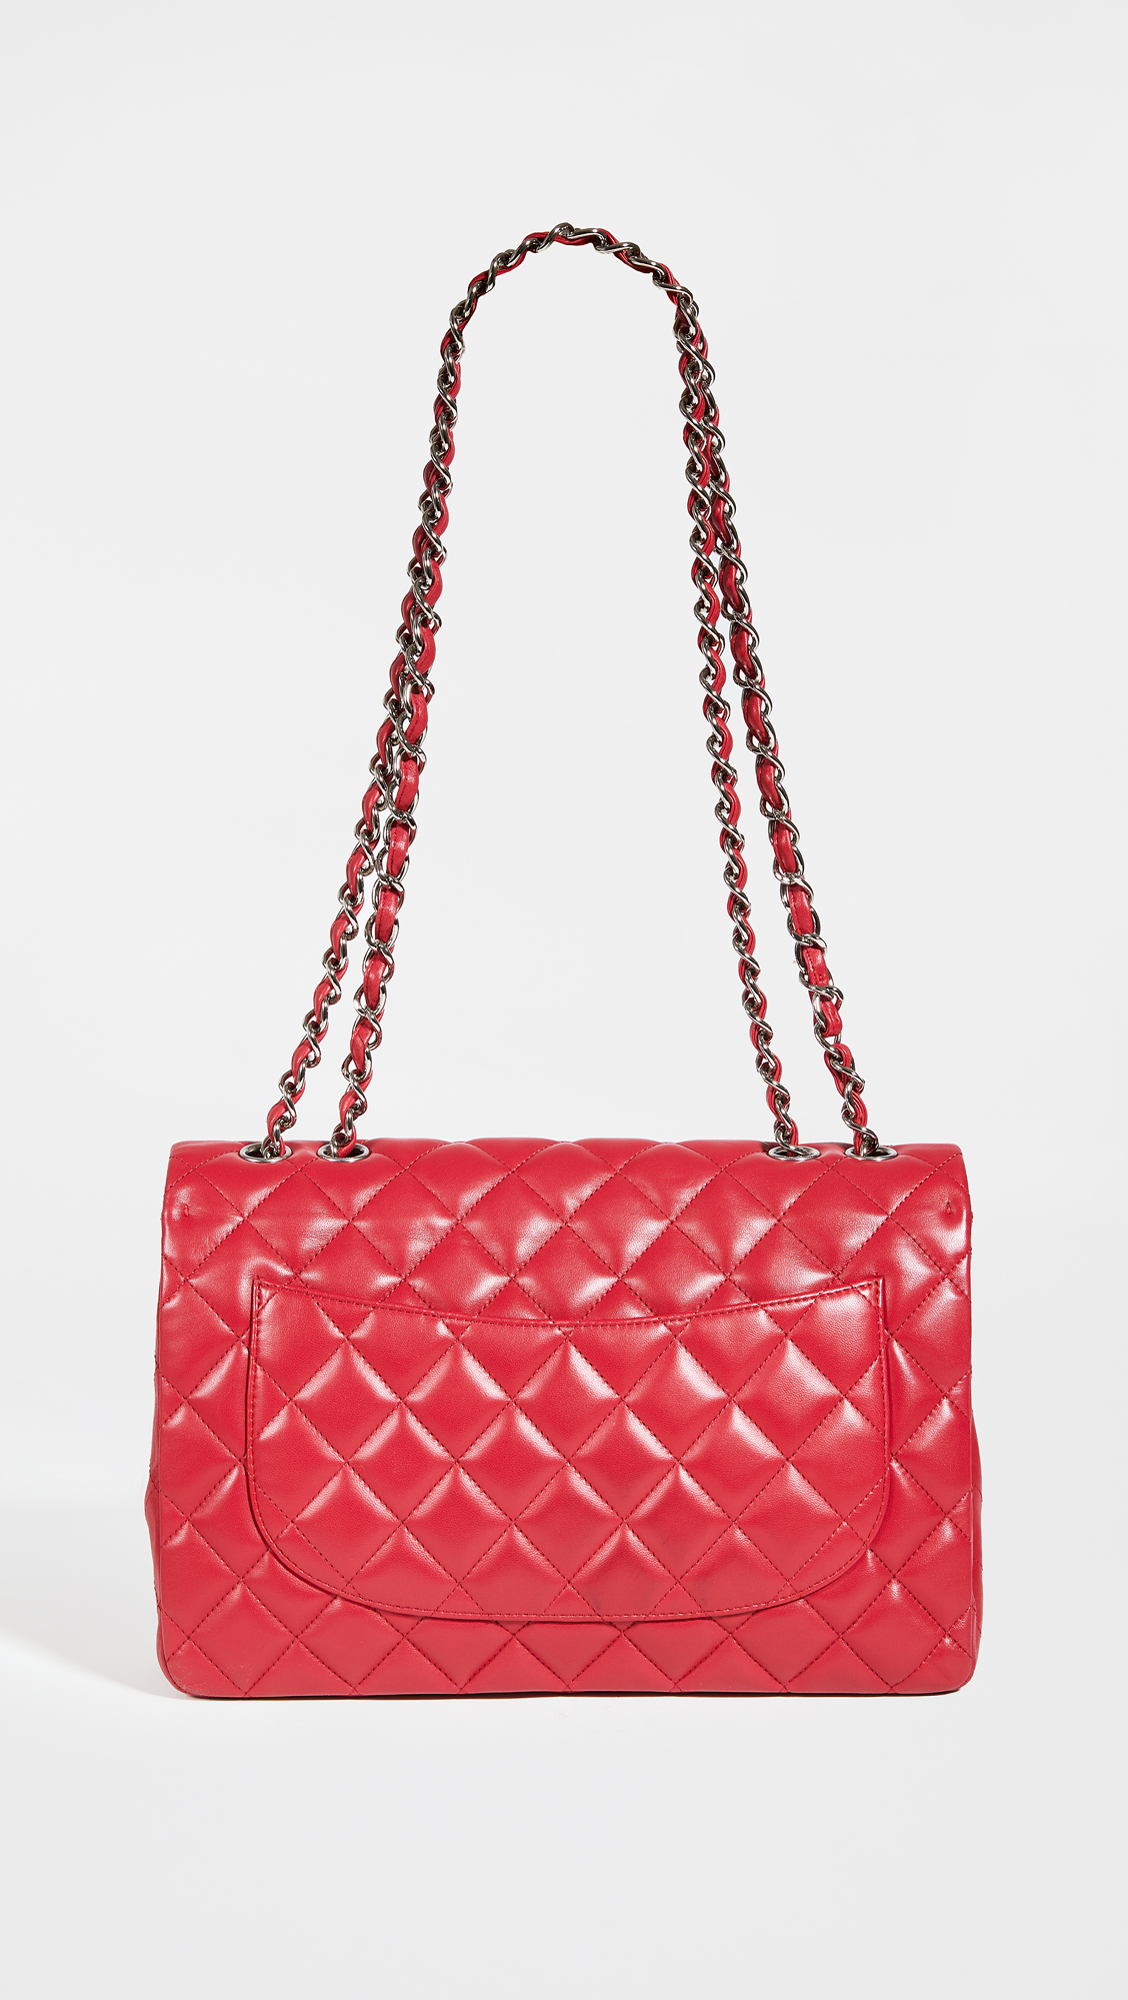 CHANEL RED QUILTED LAMBSKIN LEATHER BAG